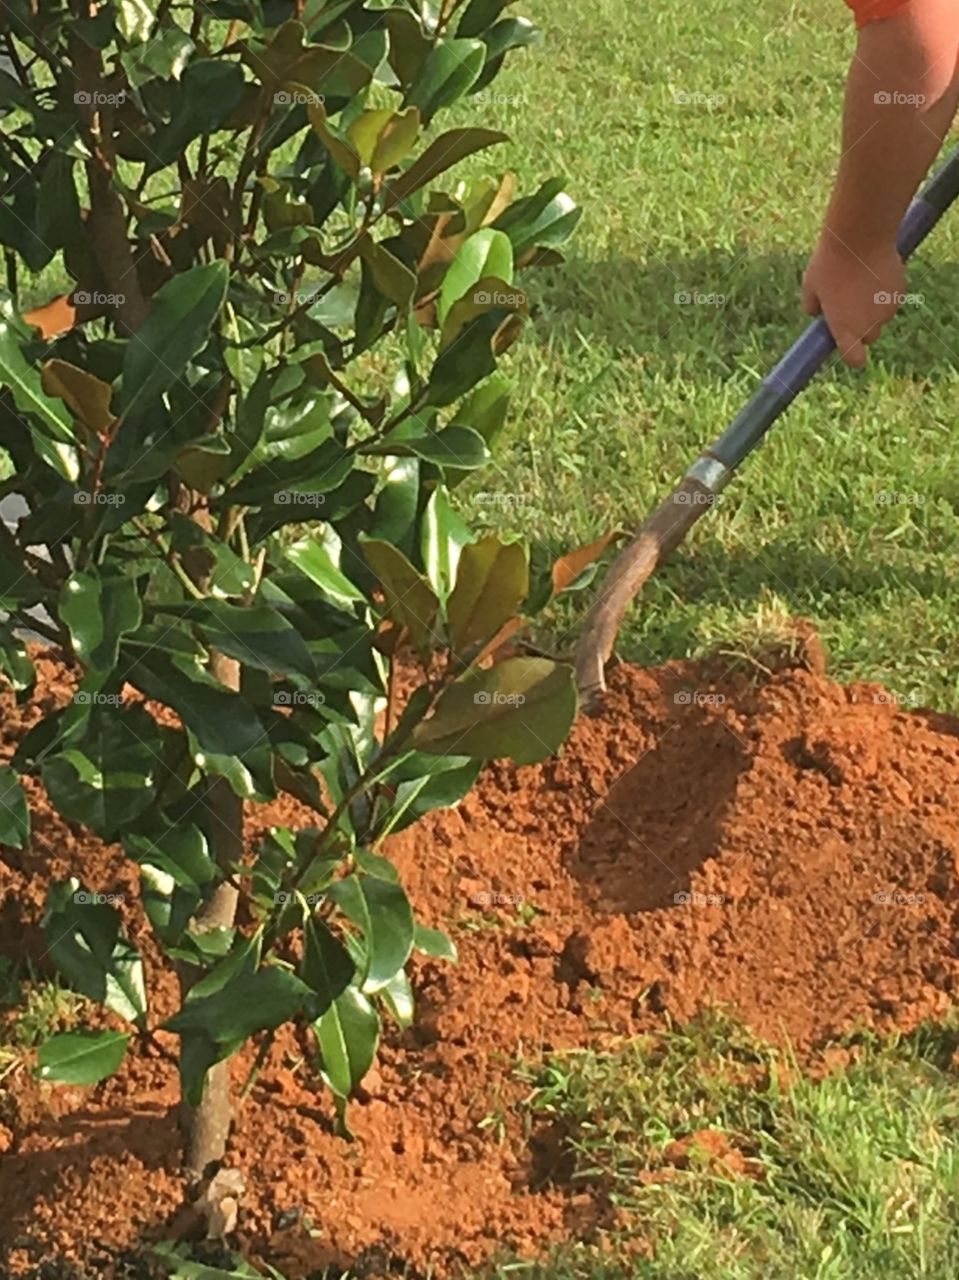 On his Great-Grandmother's 102nd birthday, a magnolia tree was planted for her, and in her honor. 